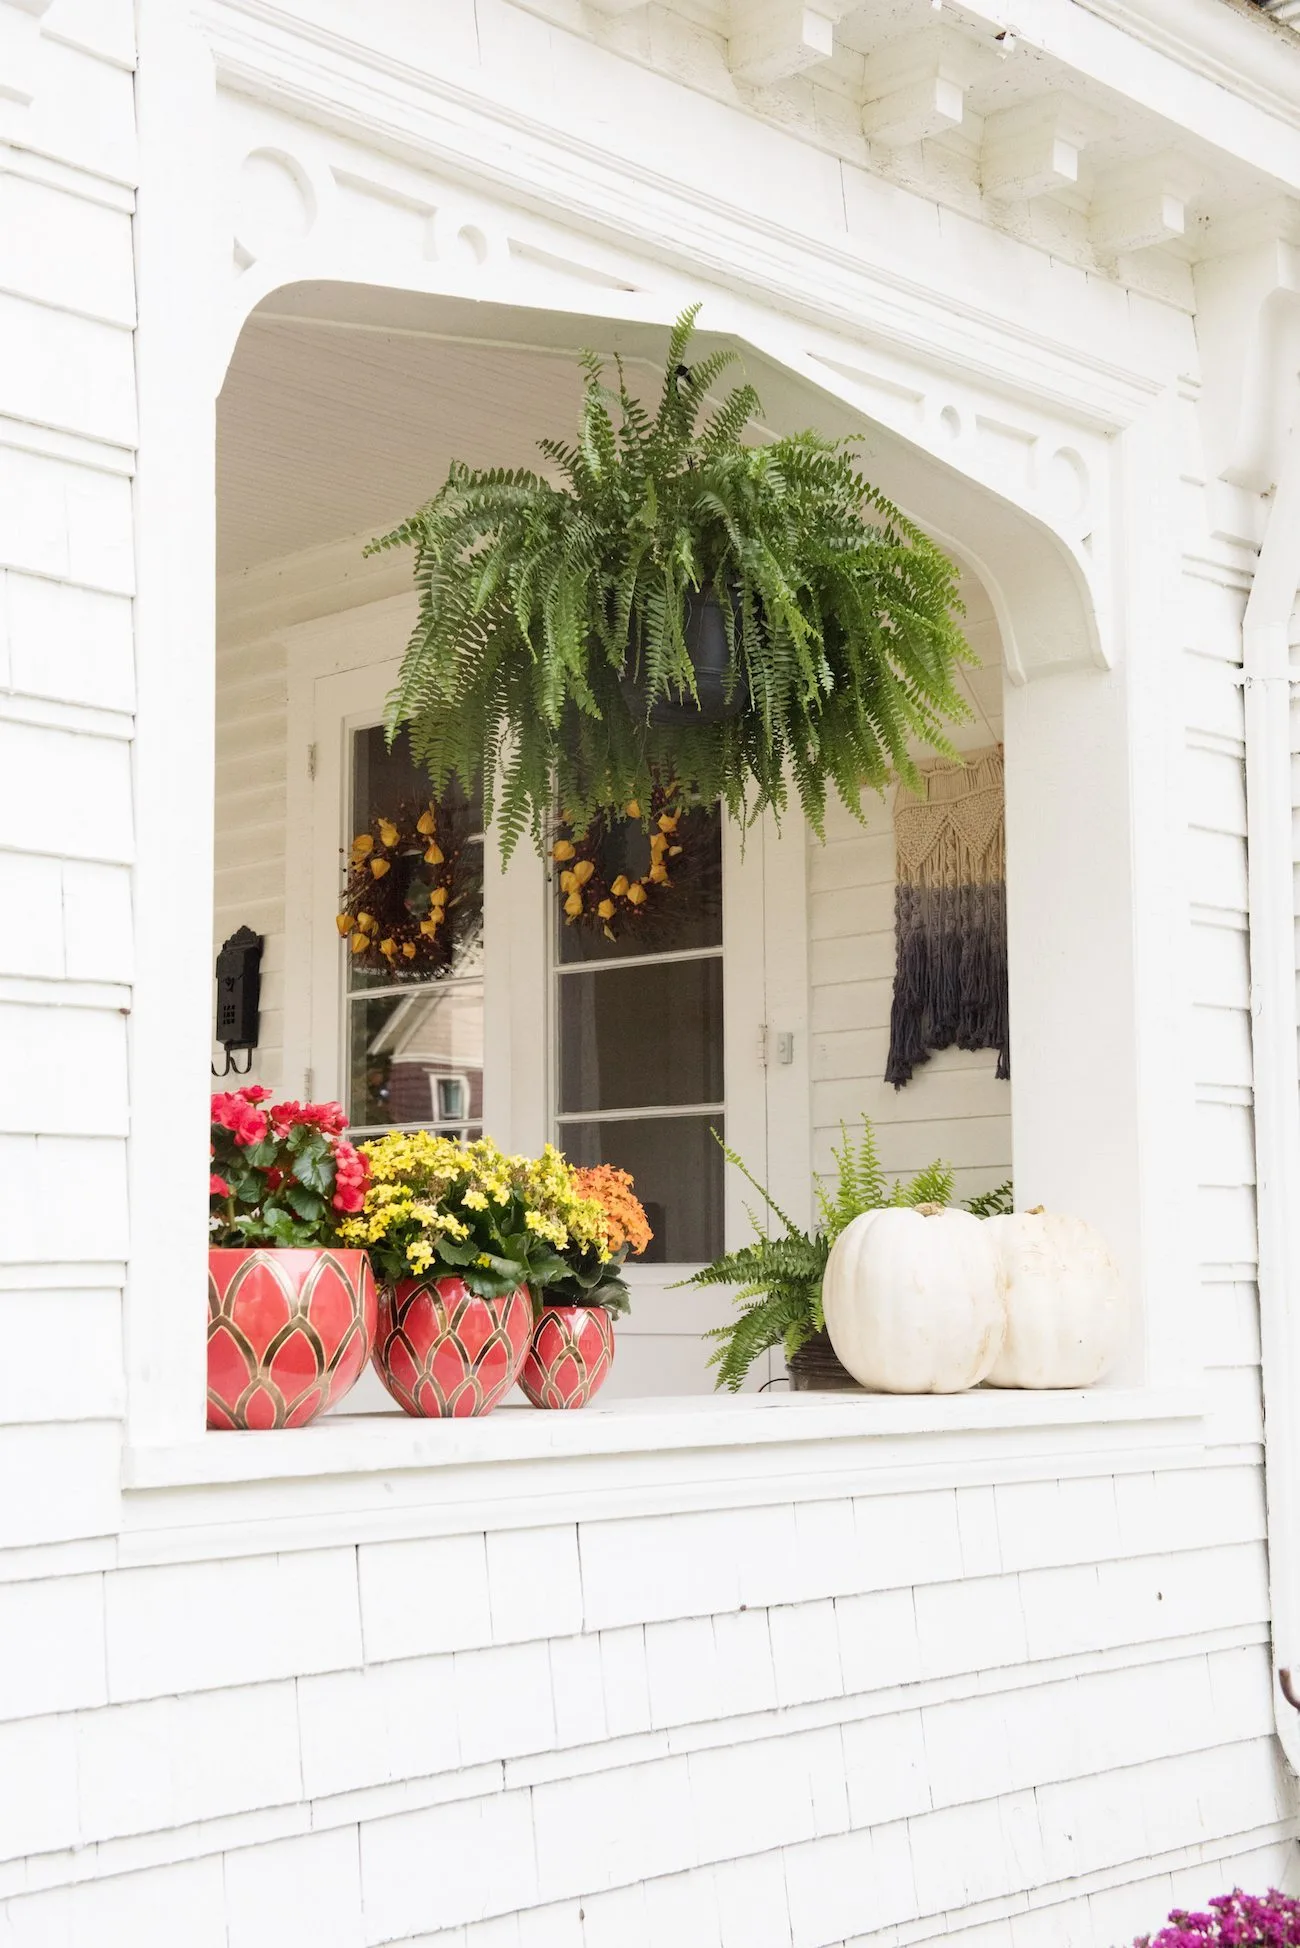 Our Fall Front Porch Decor | Fall decorating ideas, entertaining tips, party ideas and more from @cydconverse